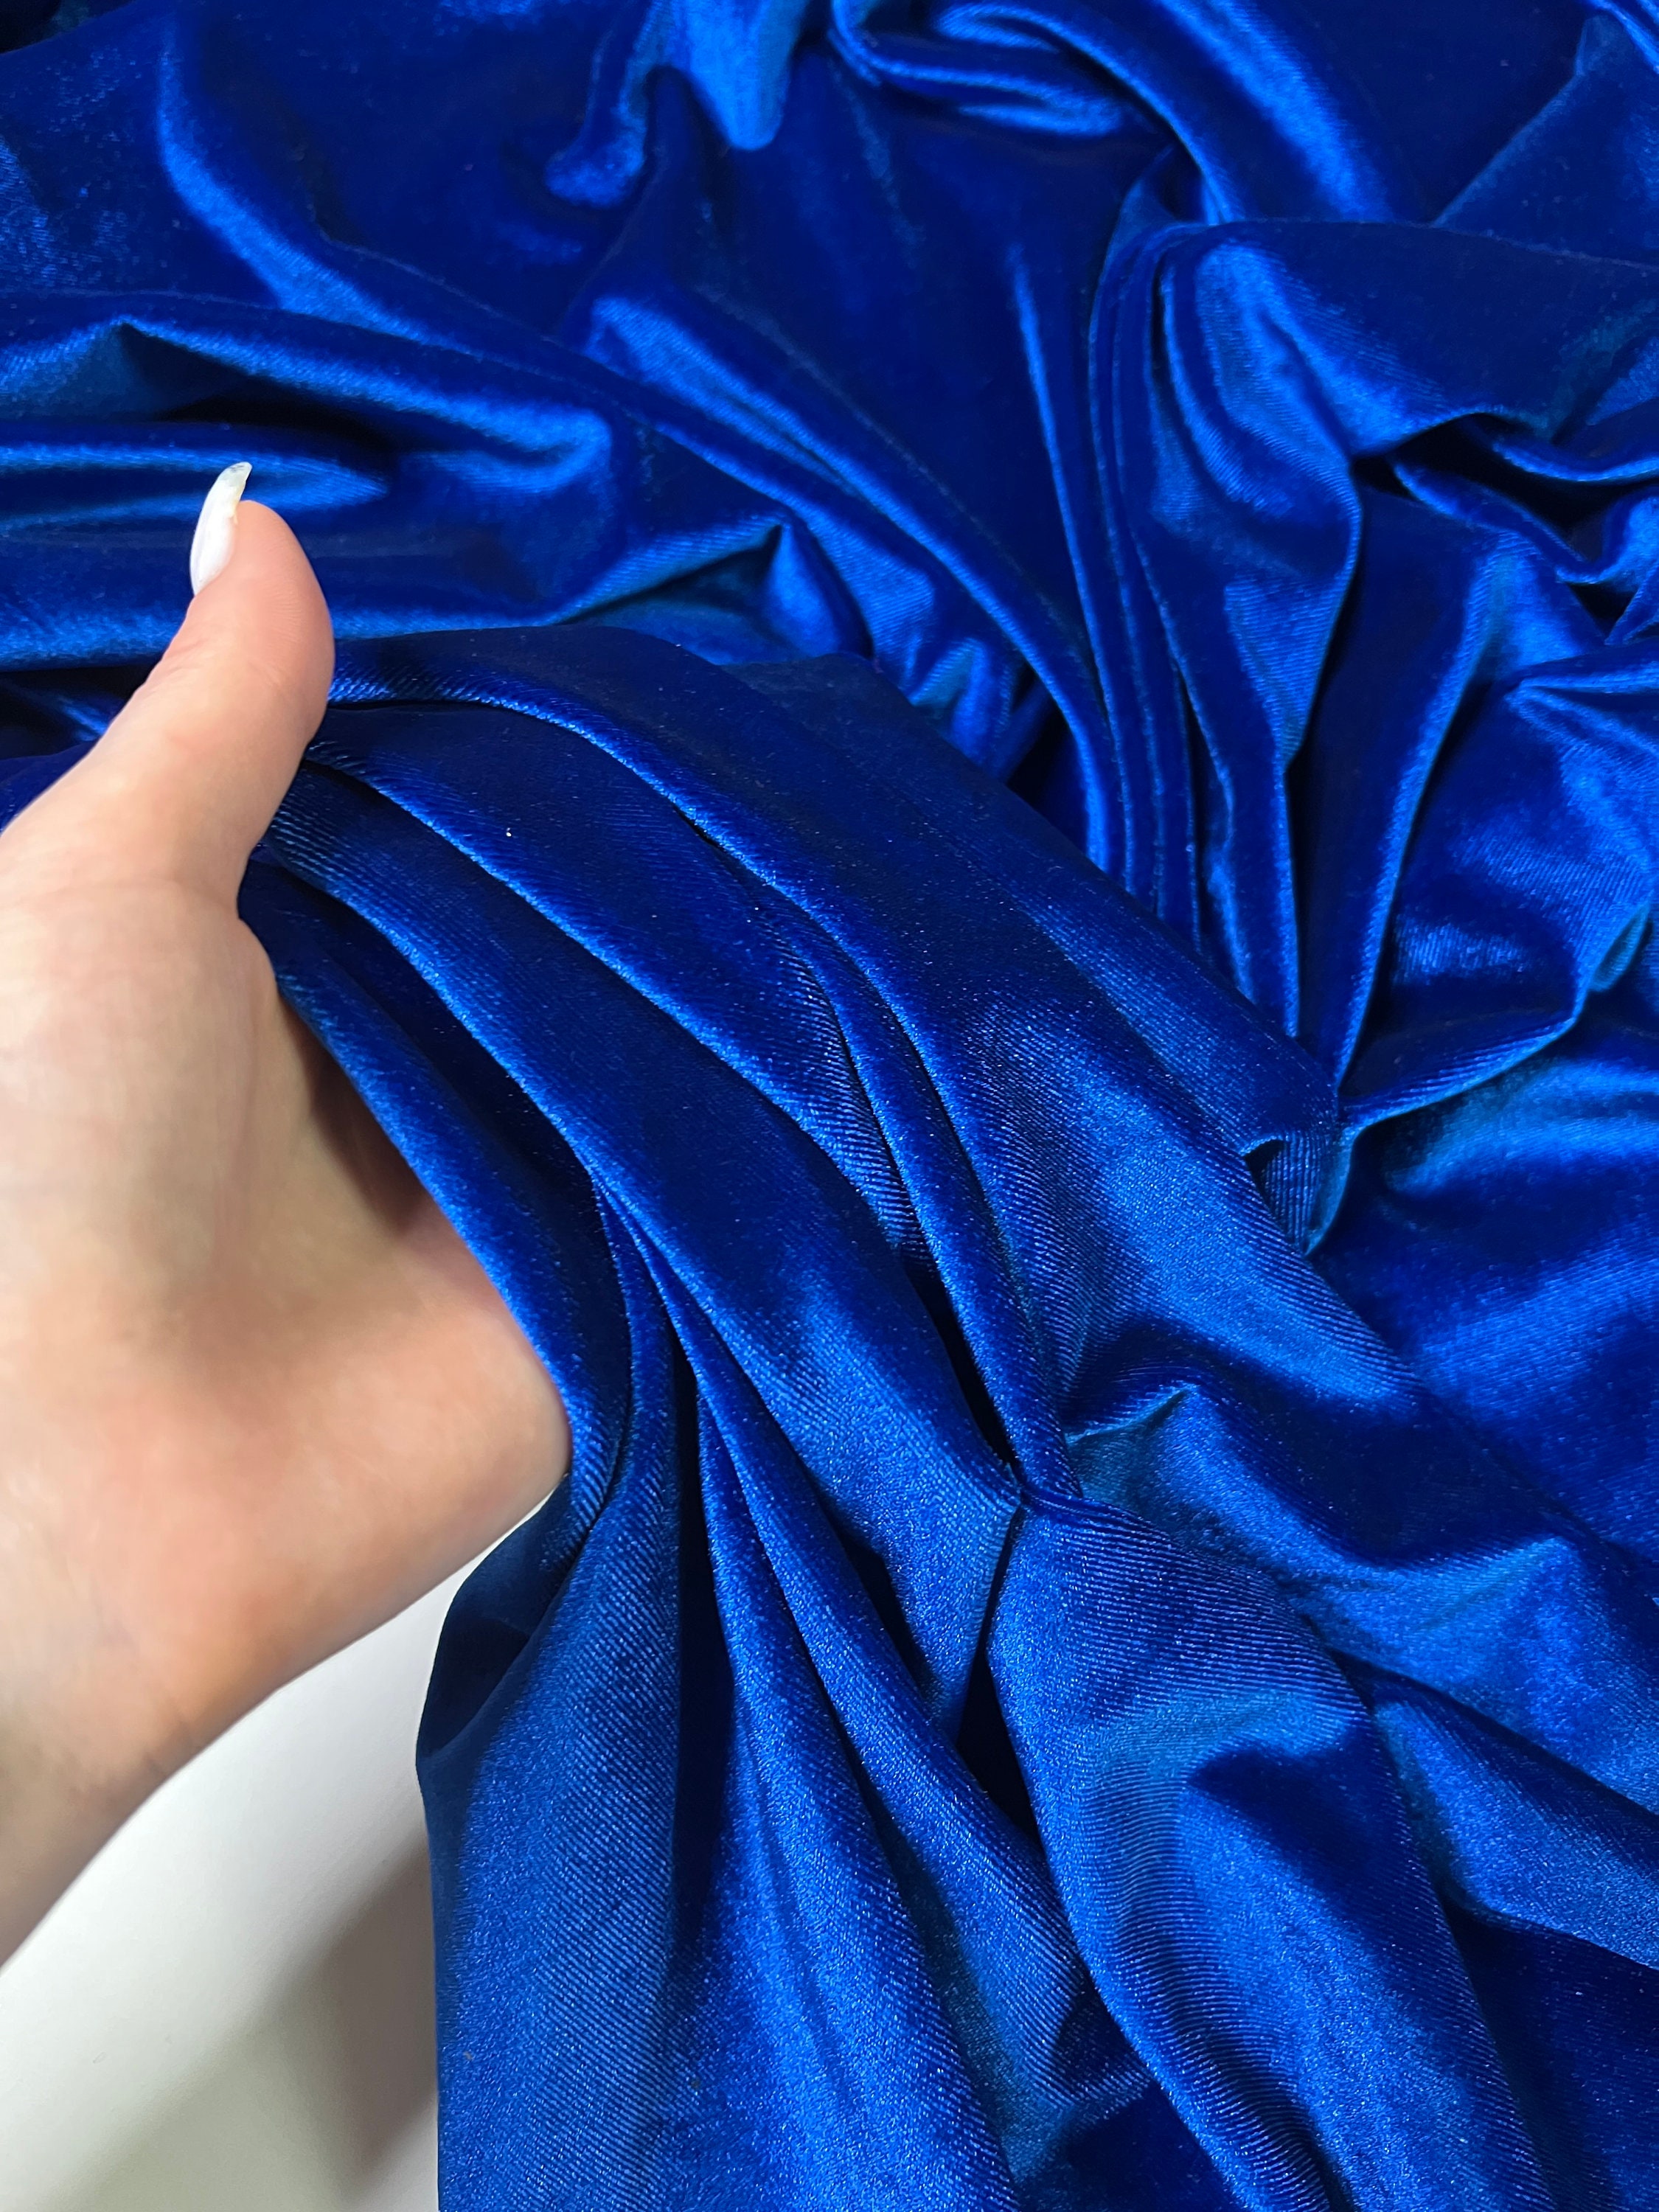 MaiMaiSuan Royal Blue Velvet Fabric by The Yard,3 Yards 60 Wide Soft Stretchy Velvet Cloth for Upholstery Sofa Chair Cover,DIY Sewing,Costume,Craft